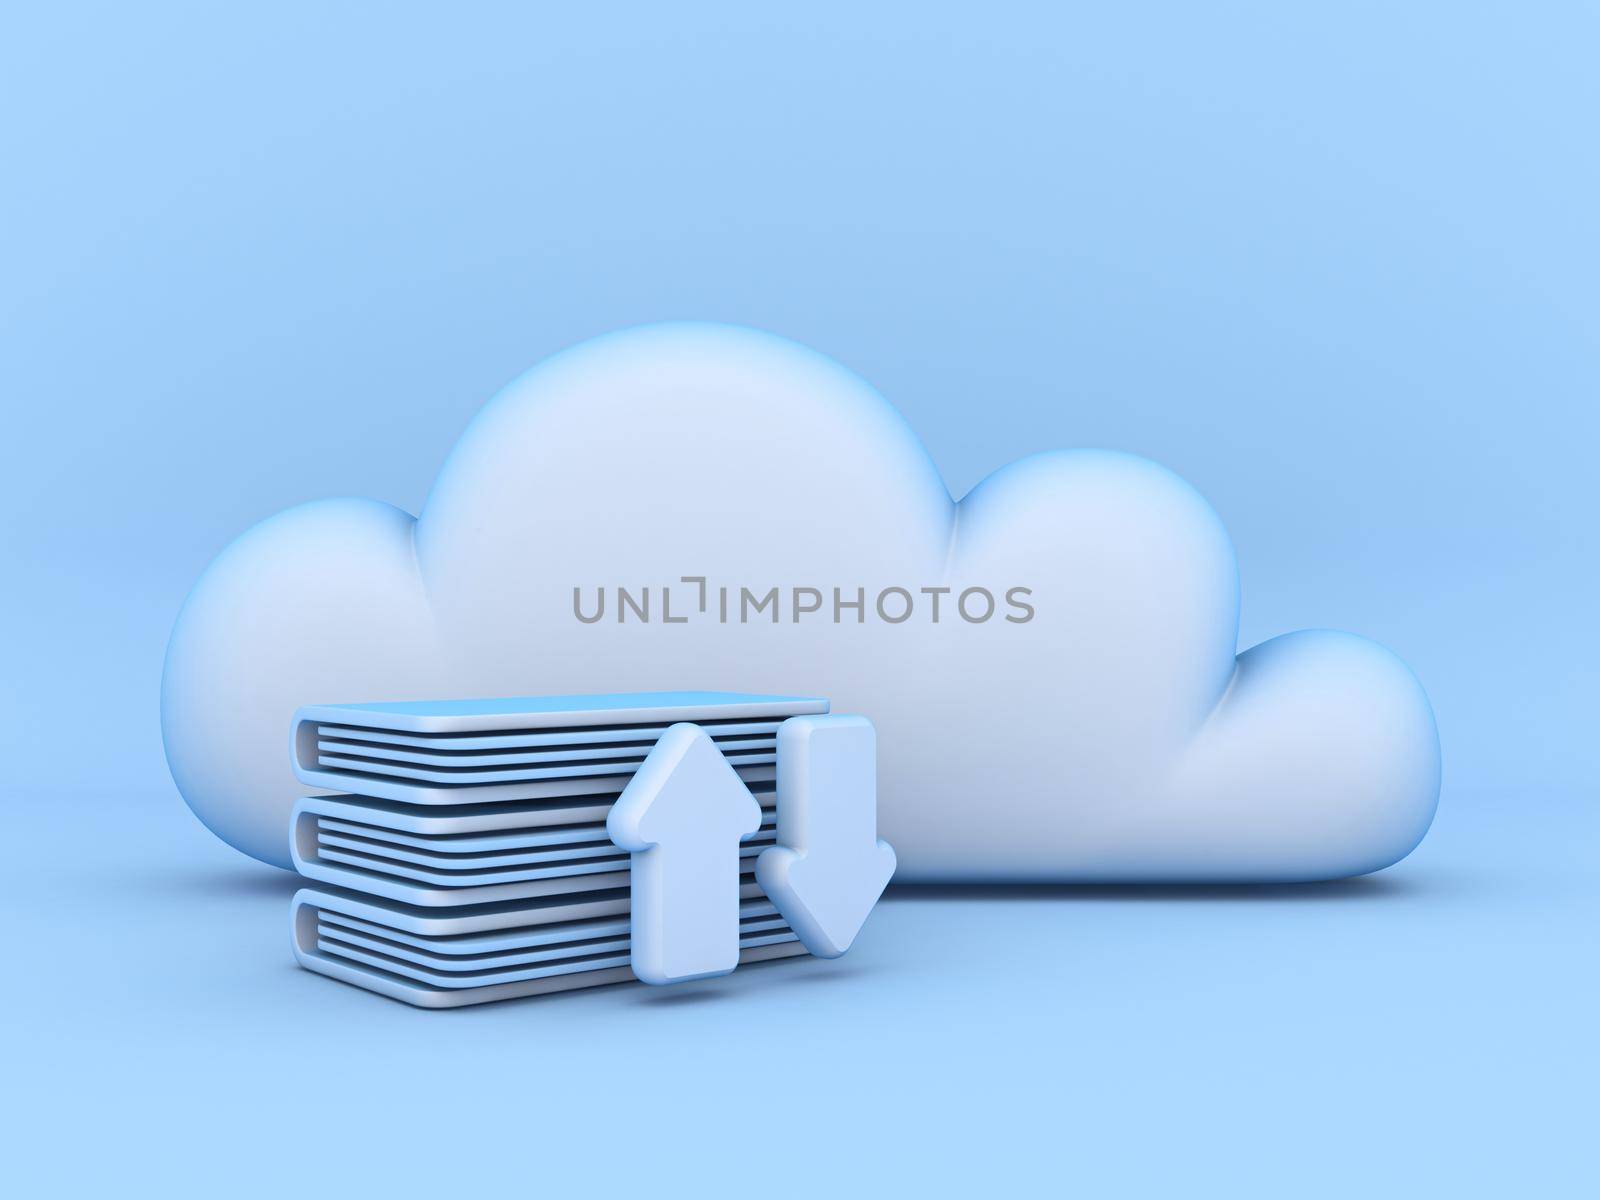 Cloud concept download and upload documents 3D rendering illustration isolated on blue background